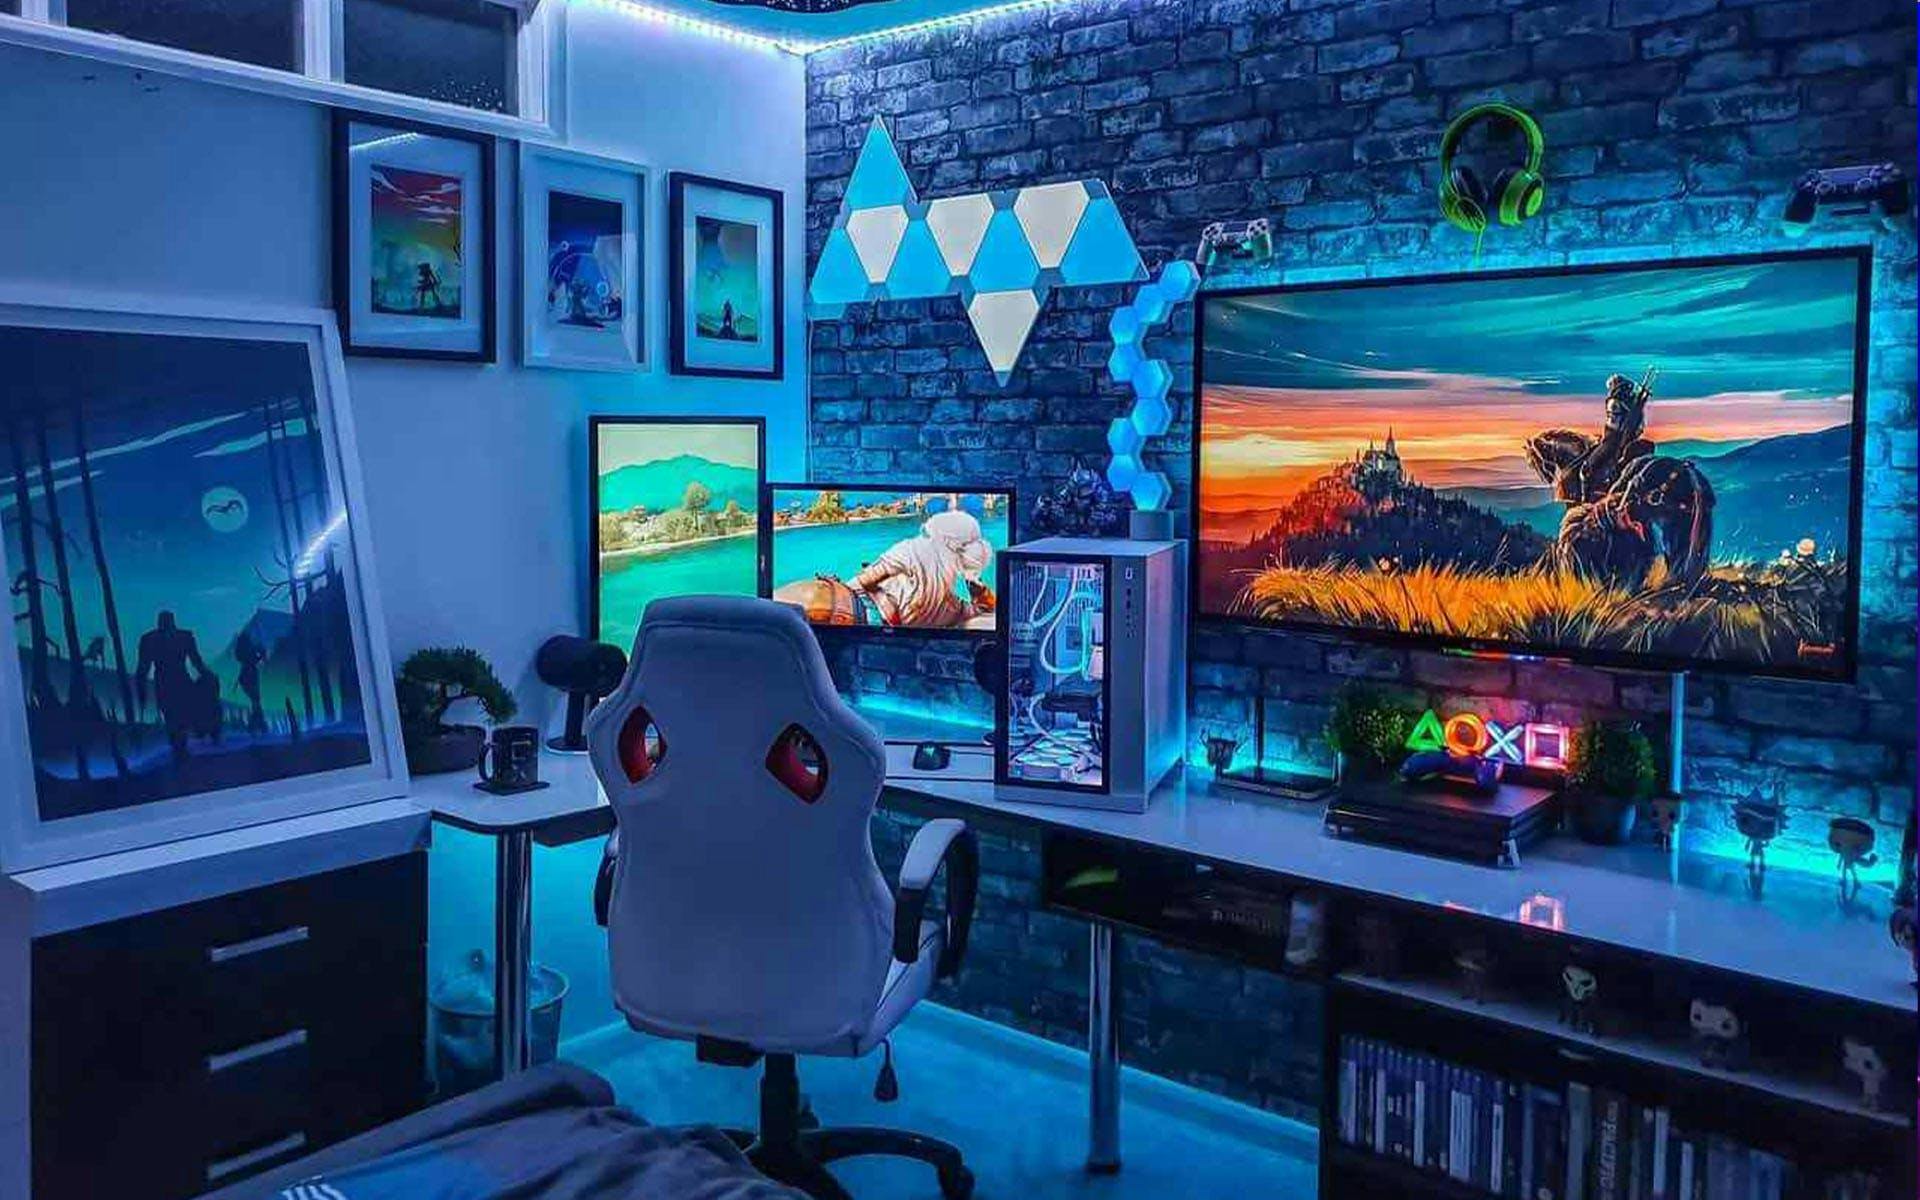 This gaming room looks like a unified whole | Credit: pinterest.com